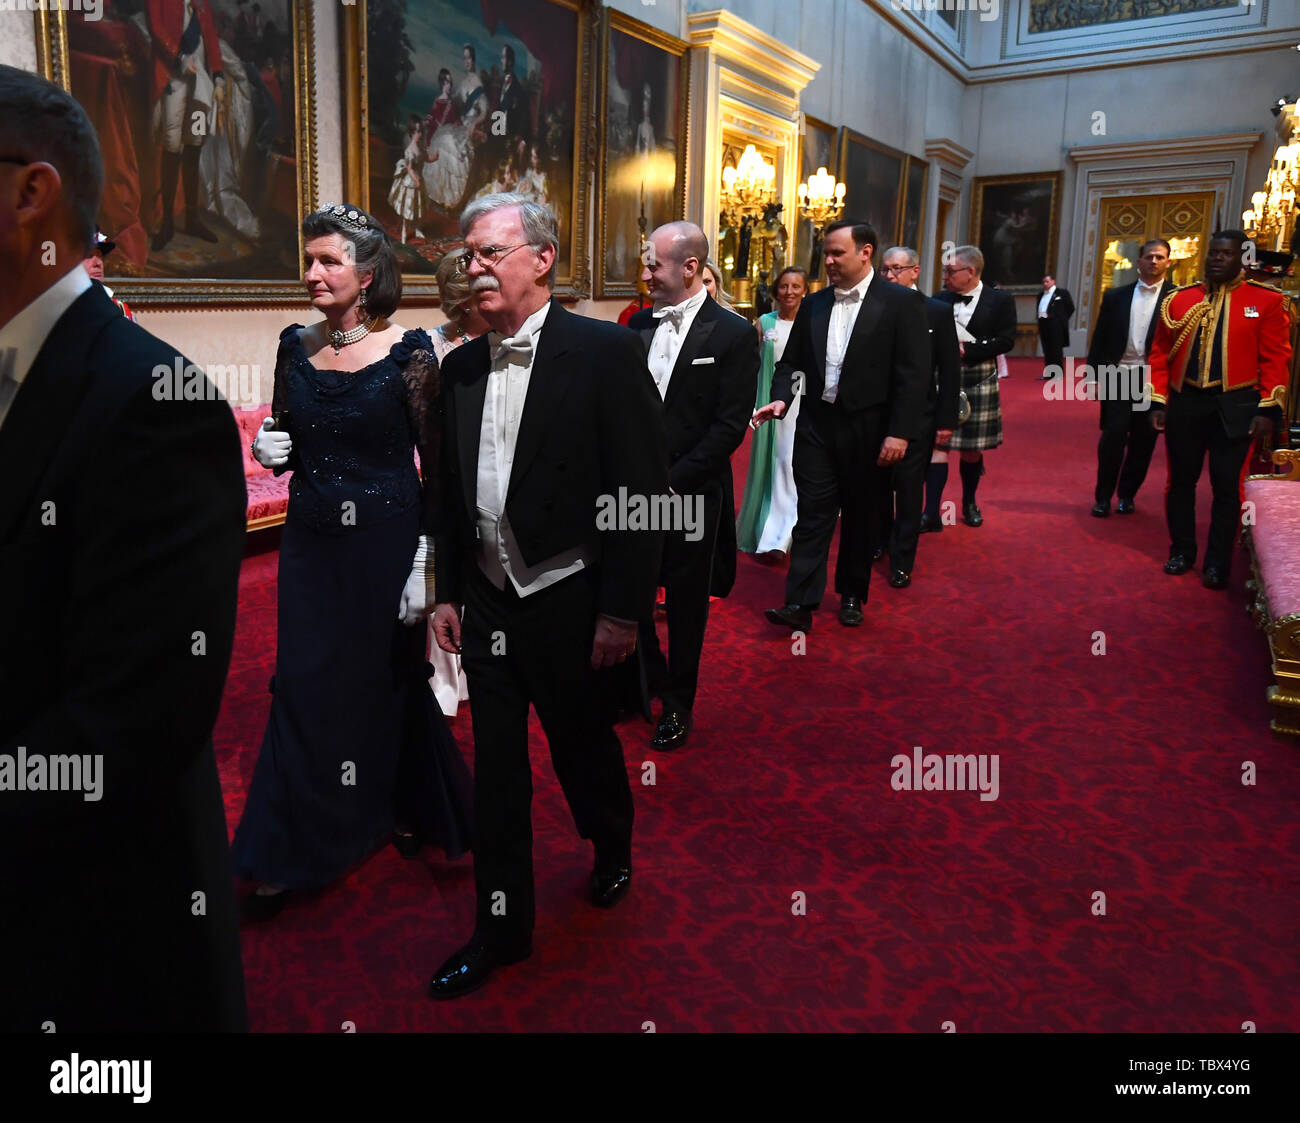 The Viscountess Brookeborough and John R. Bolton arrive through the East Gallery during the State Banquet at Buckingham Palace, London, on day one of the US President's three day state visit to the UK. Stock Photo